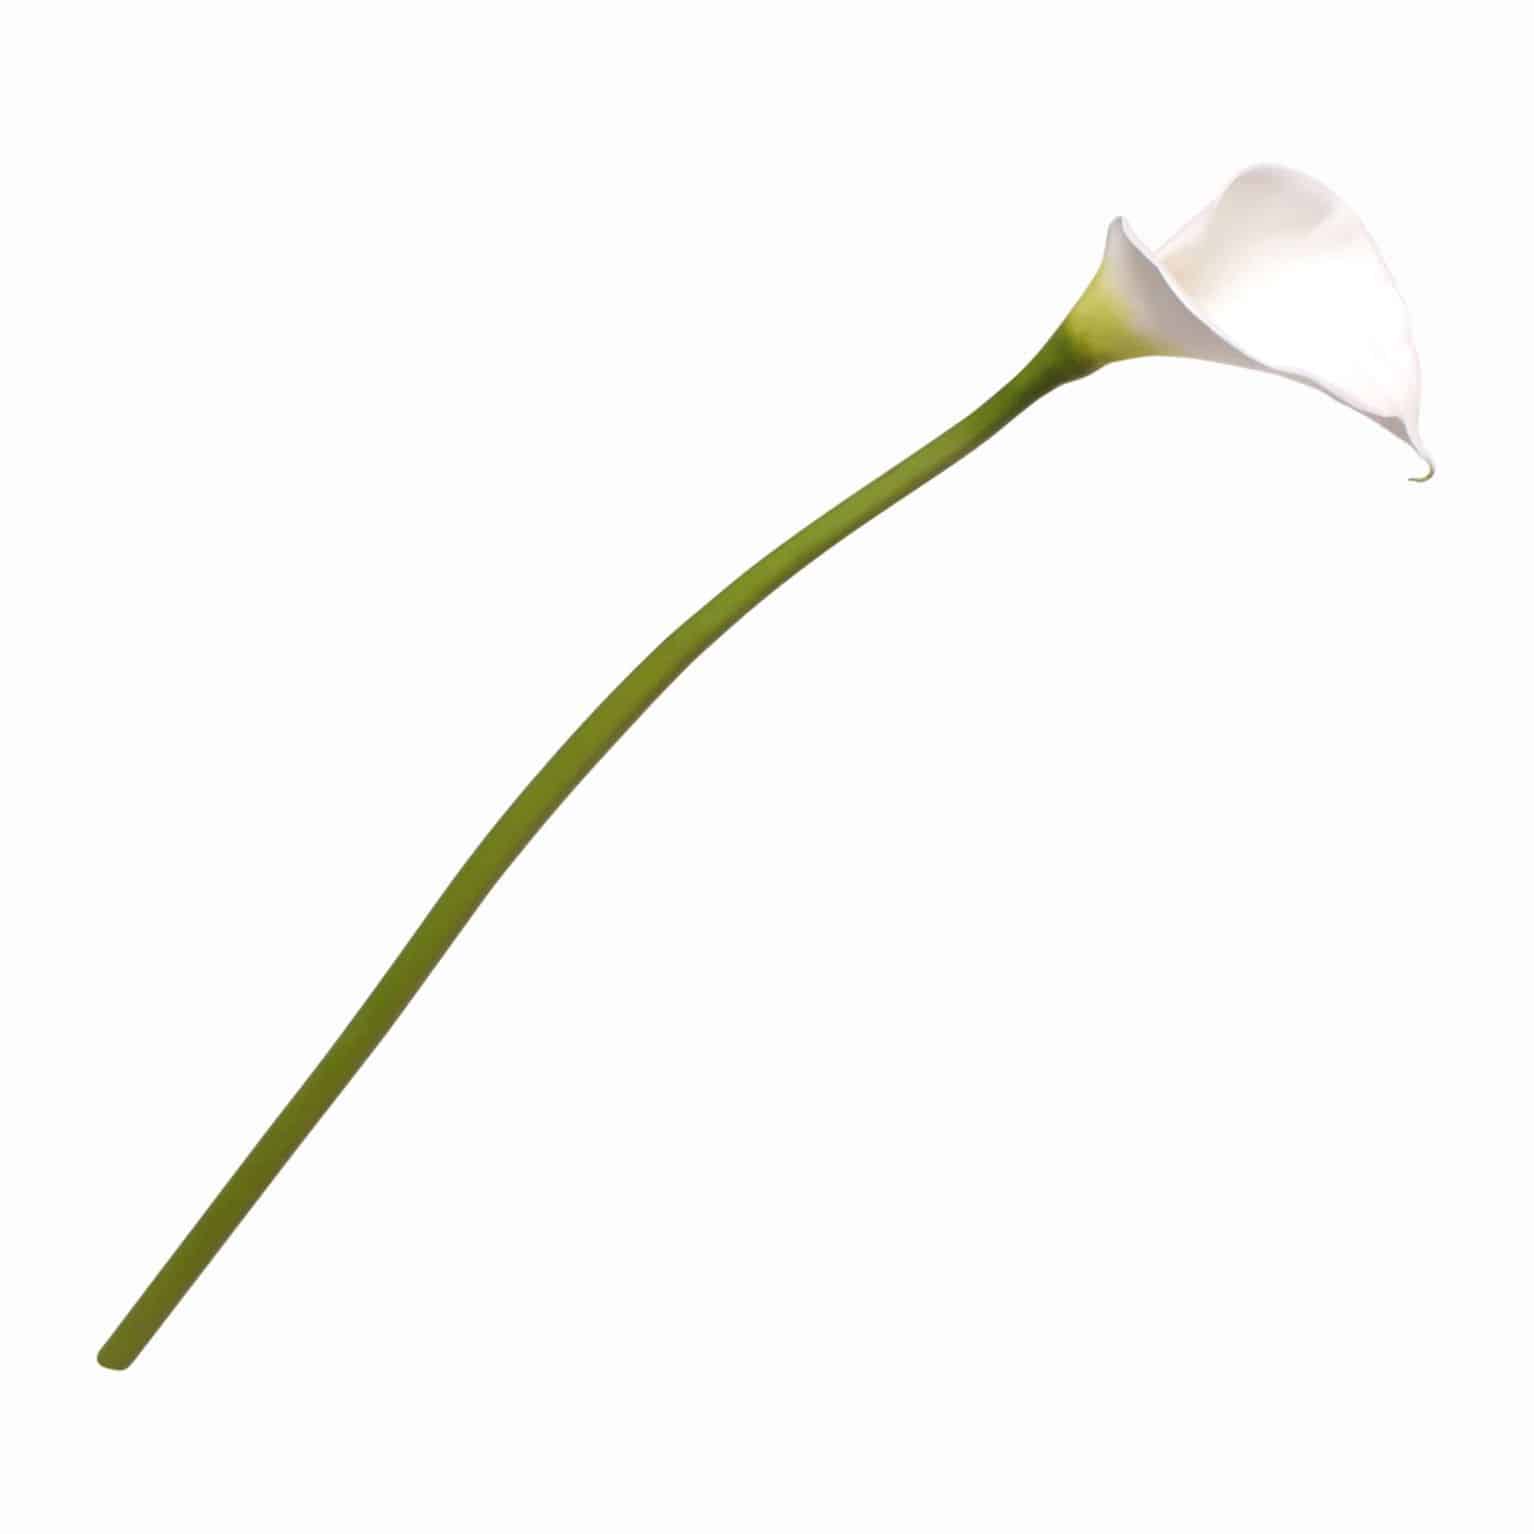 Shop for our best silk flowers. This calla lily is a true match for the fresh flower. Green stem blends into pure white head. Excellent for your modern arrangements.